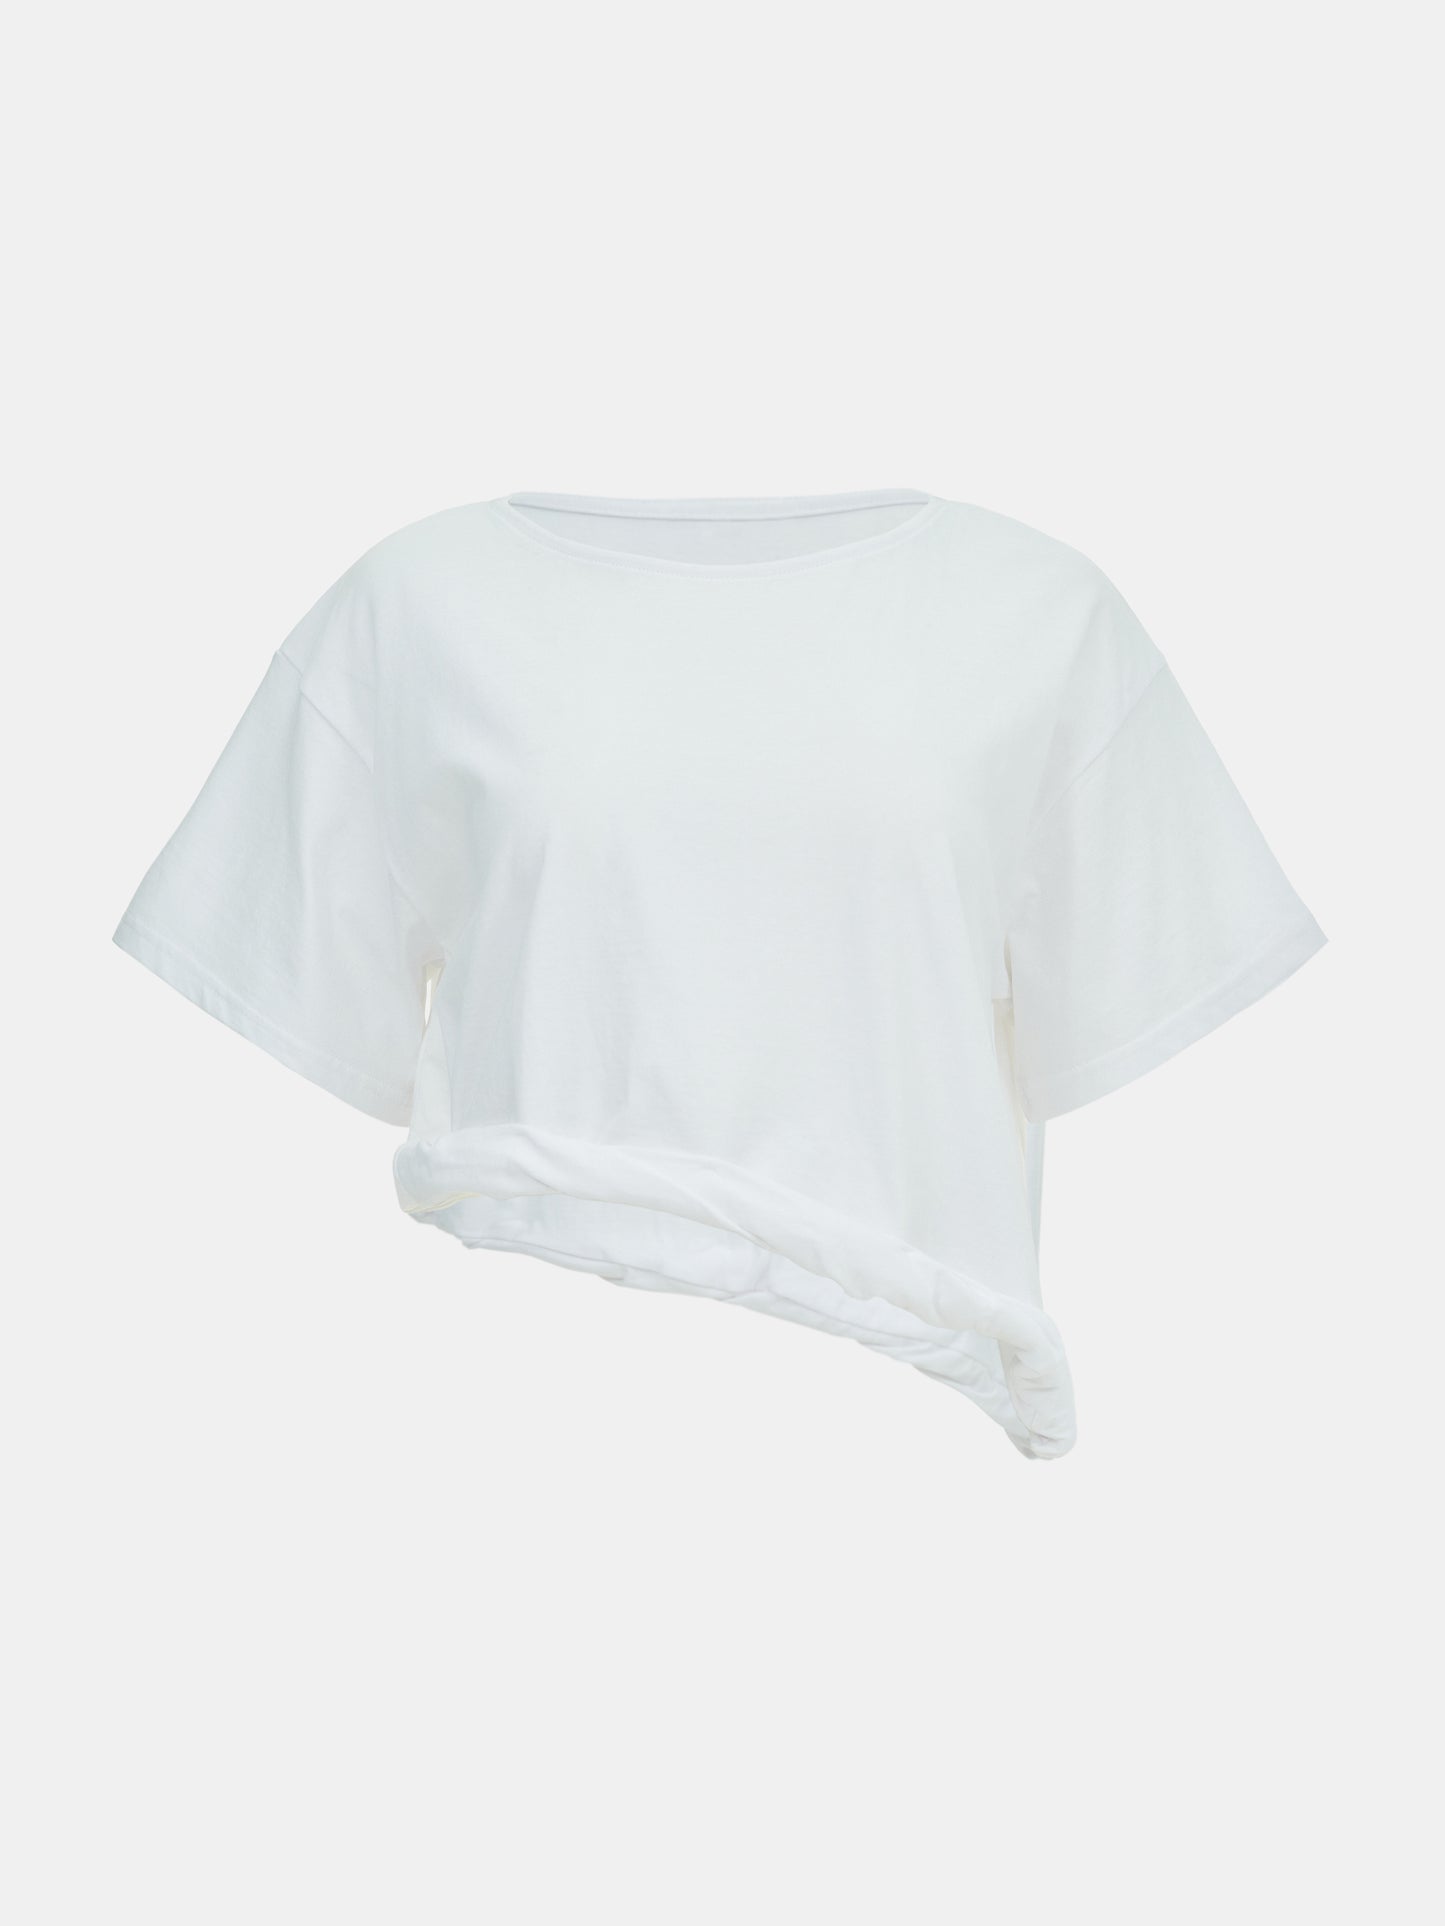 Twisted Cotton T-Shirt, White